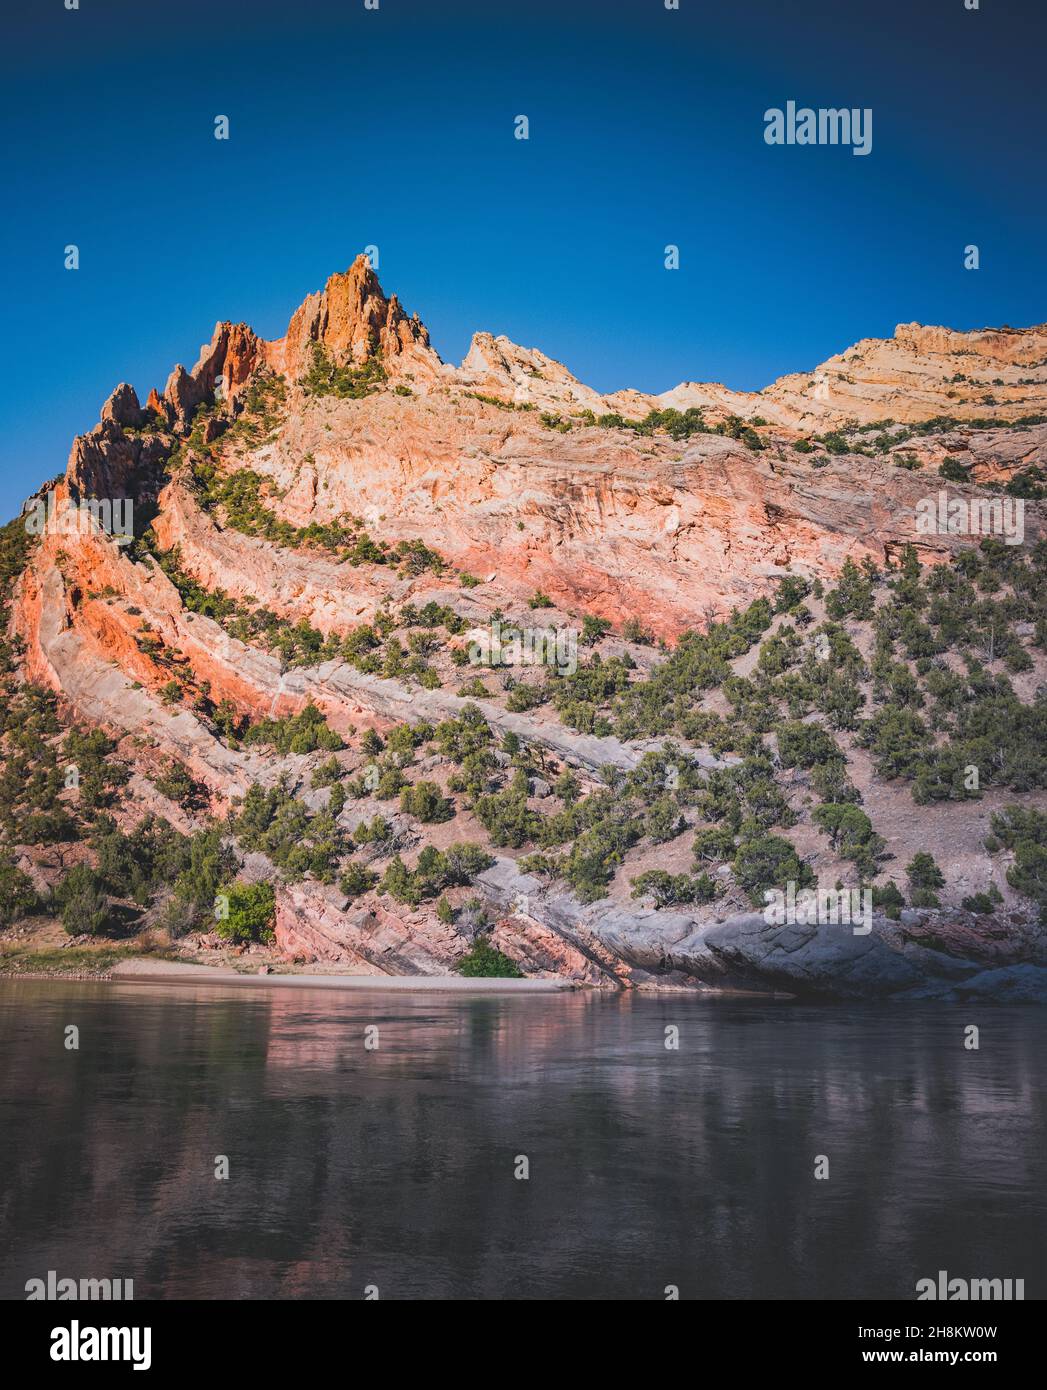 Stone Crown at Echo Park Camp, Landscape Photography, Dinosaur Nation Monument, Utah and Colorado, USA Stock Photo